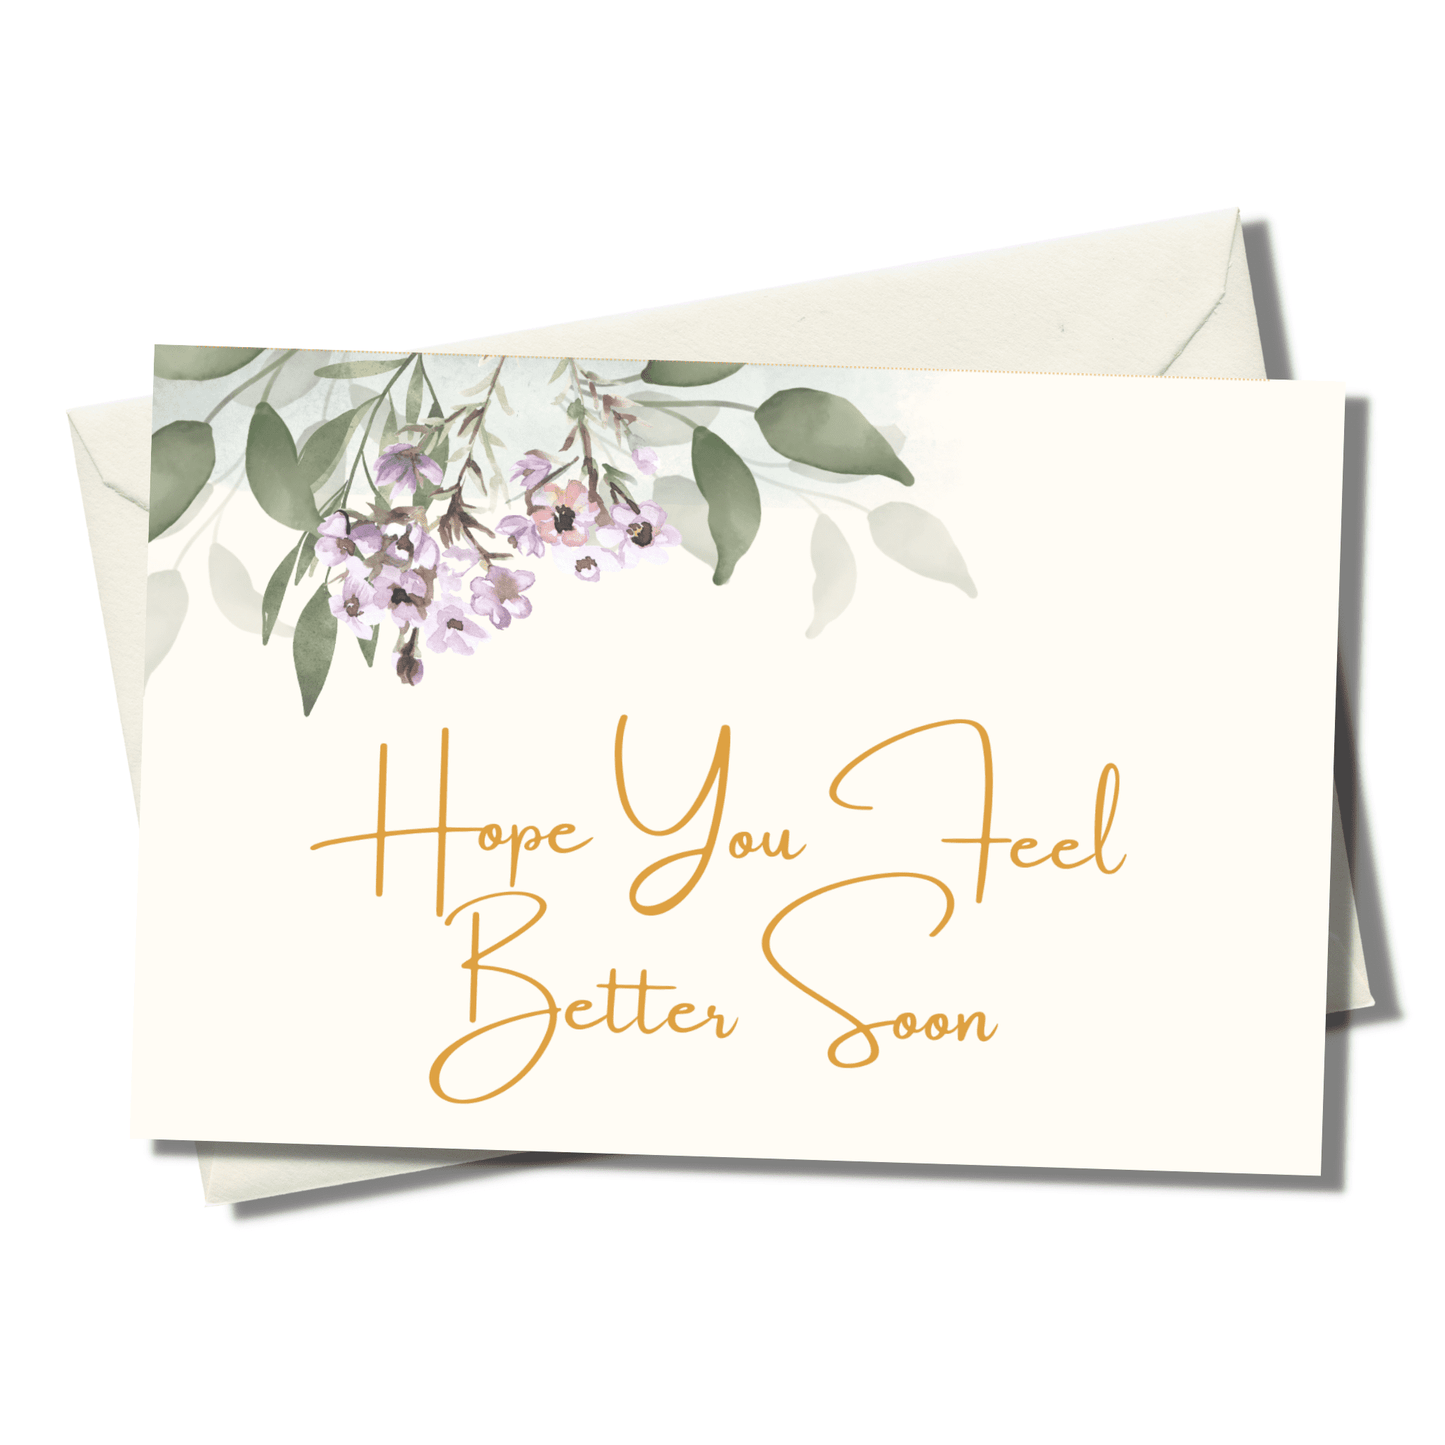 hope you feel better soon personalized meditation cards